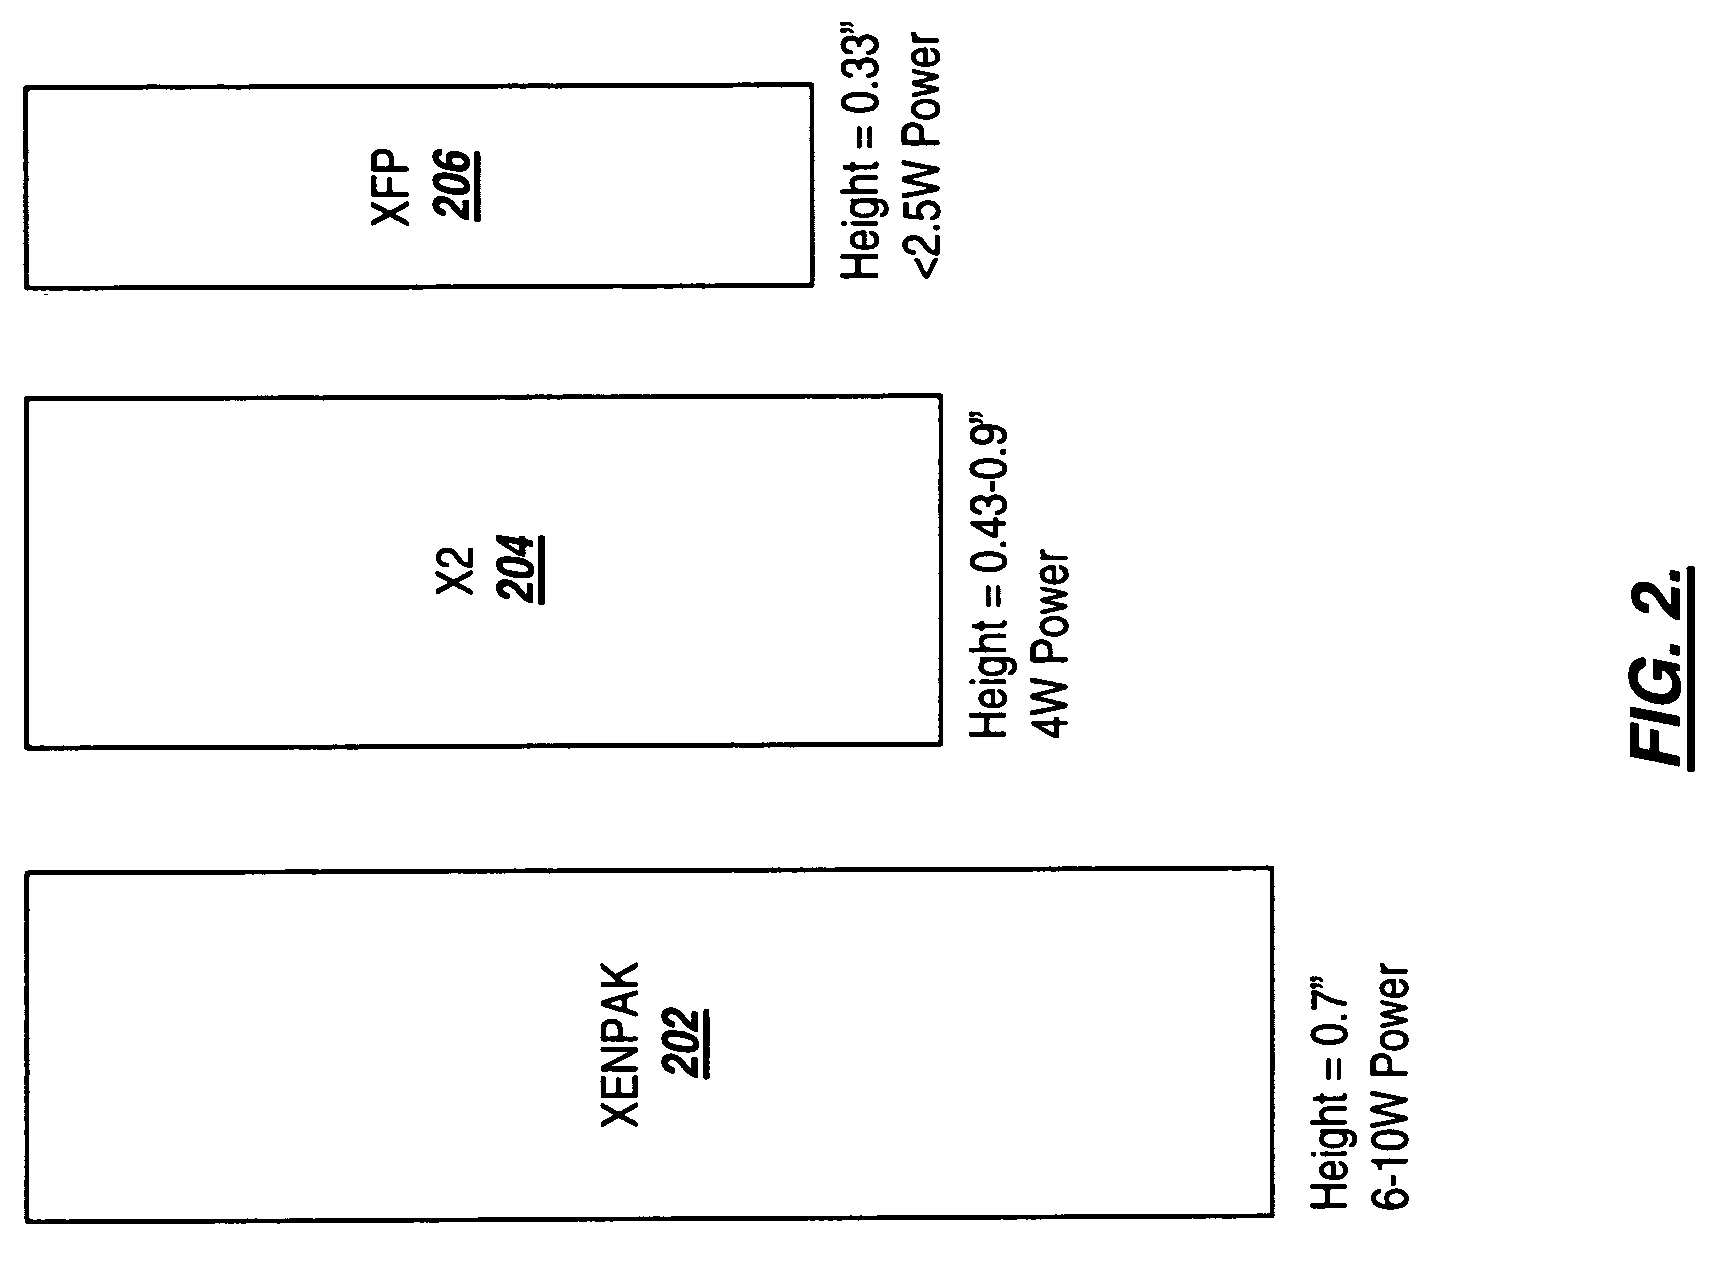 Systems and methods for the integration of framing, OAM&P, and forward error correction in pluggable optical transceiver devices